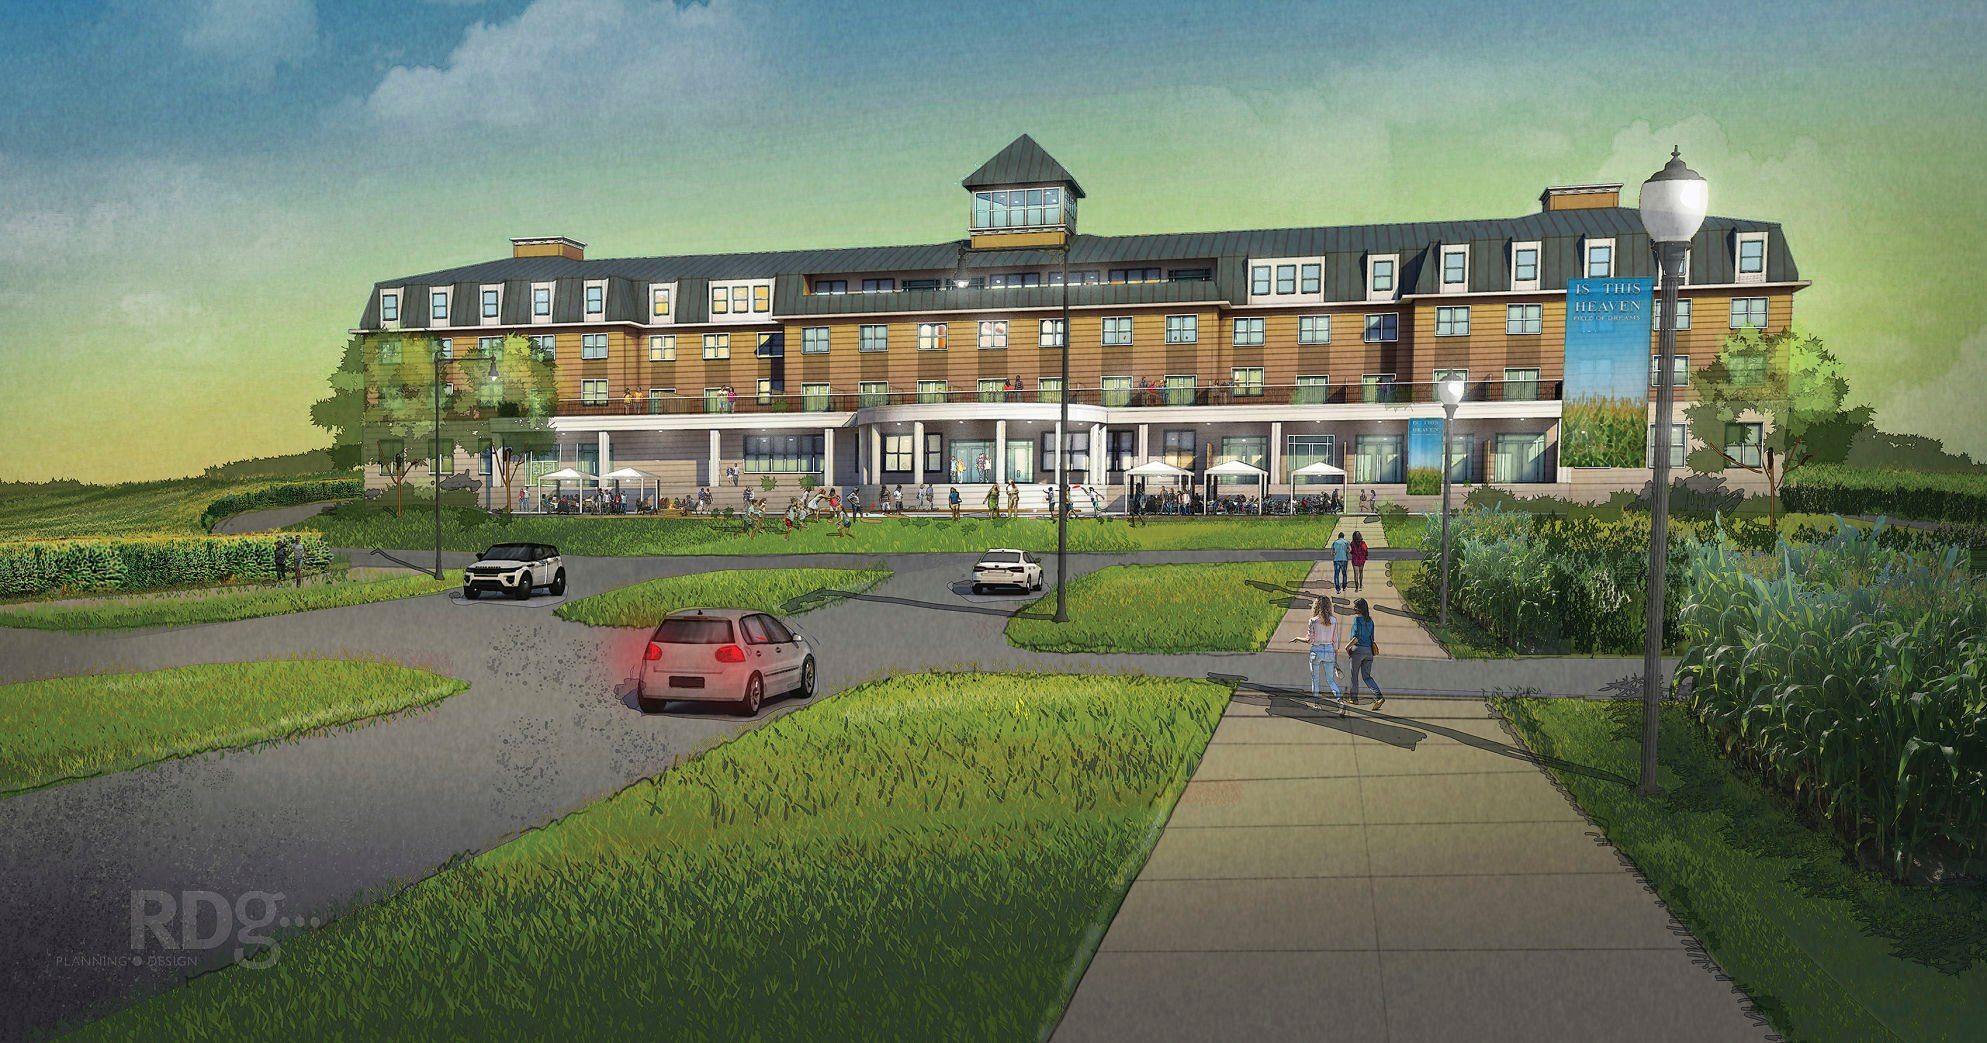 The complex will include a 104-room boutique hotel.    PHOTO CREDIT: Courtesy of RDG Planning & Desig